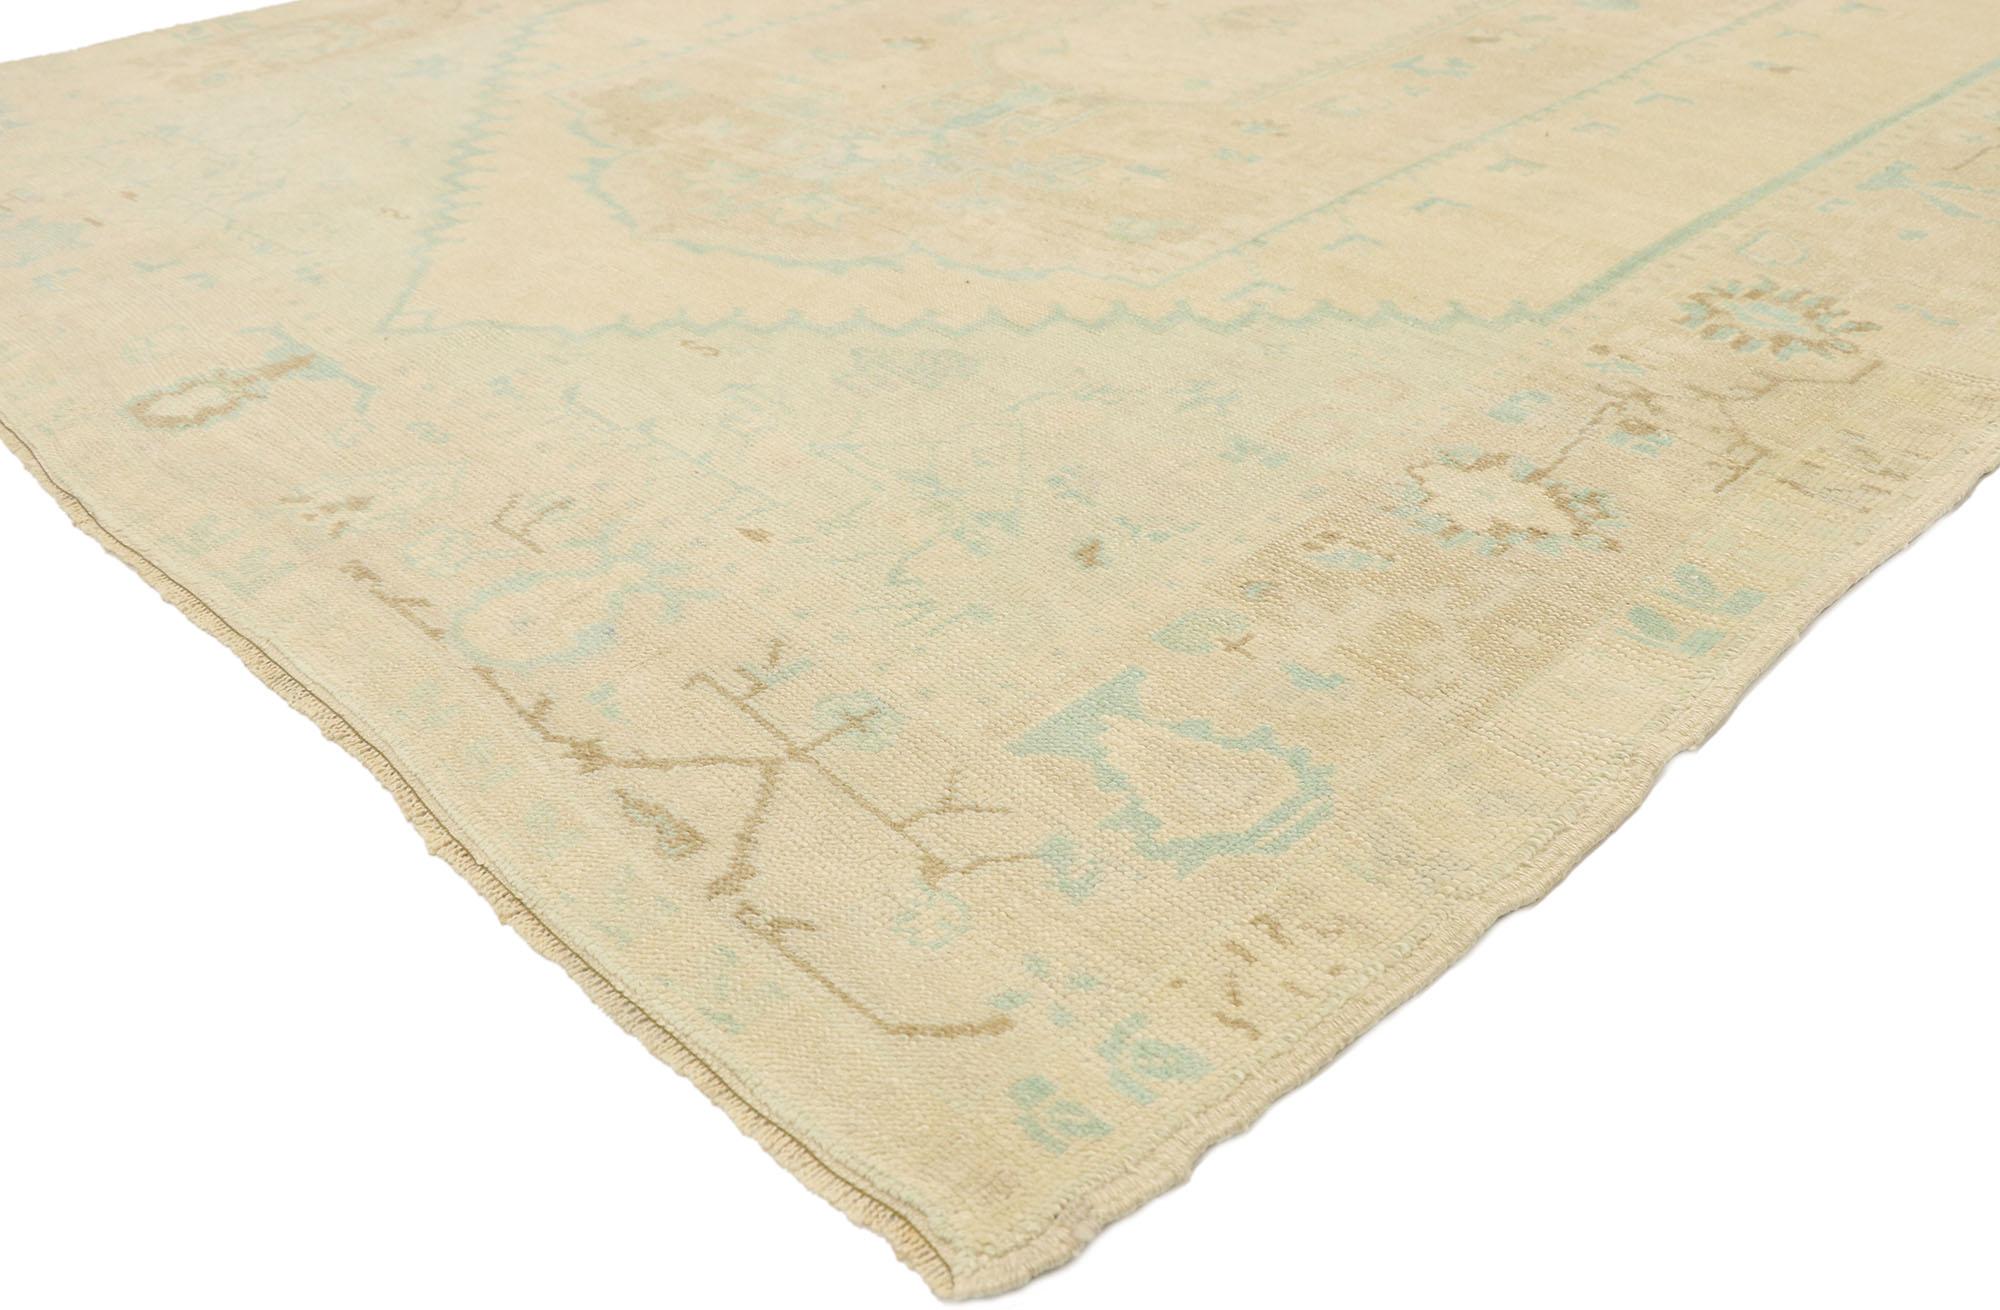 52967, vintage Turkish Oushak Rug with Gustavian Swedish country cottage style 05'09 x 08'10. Balancing Gustavian grace with Swedish simplicity, this hand knotted wool vintage Turkish Oushak rug displays nostalgic charm and inimitable warmth. The